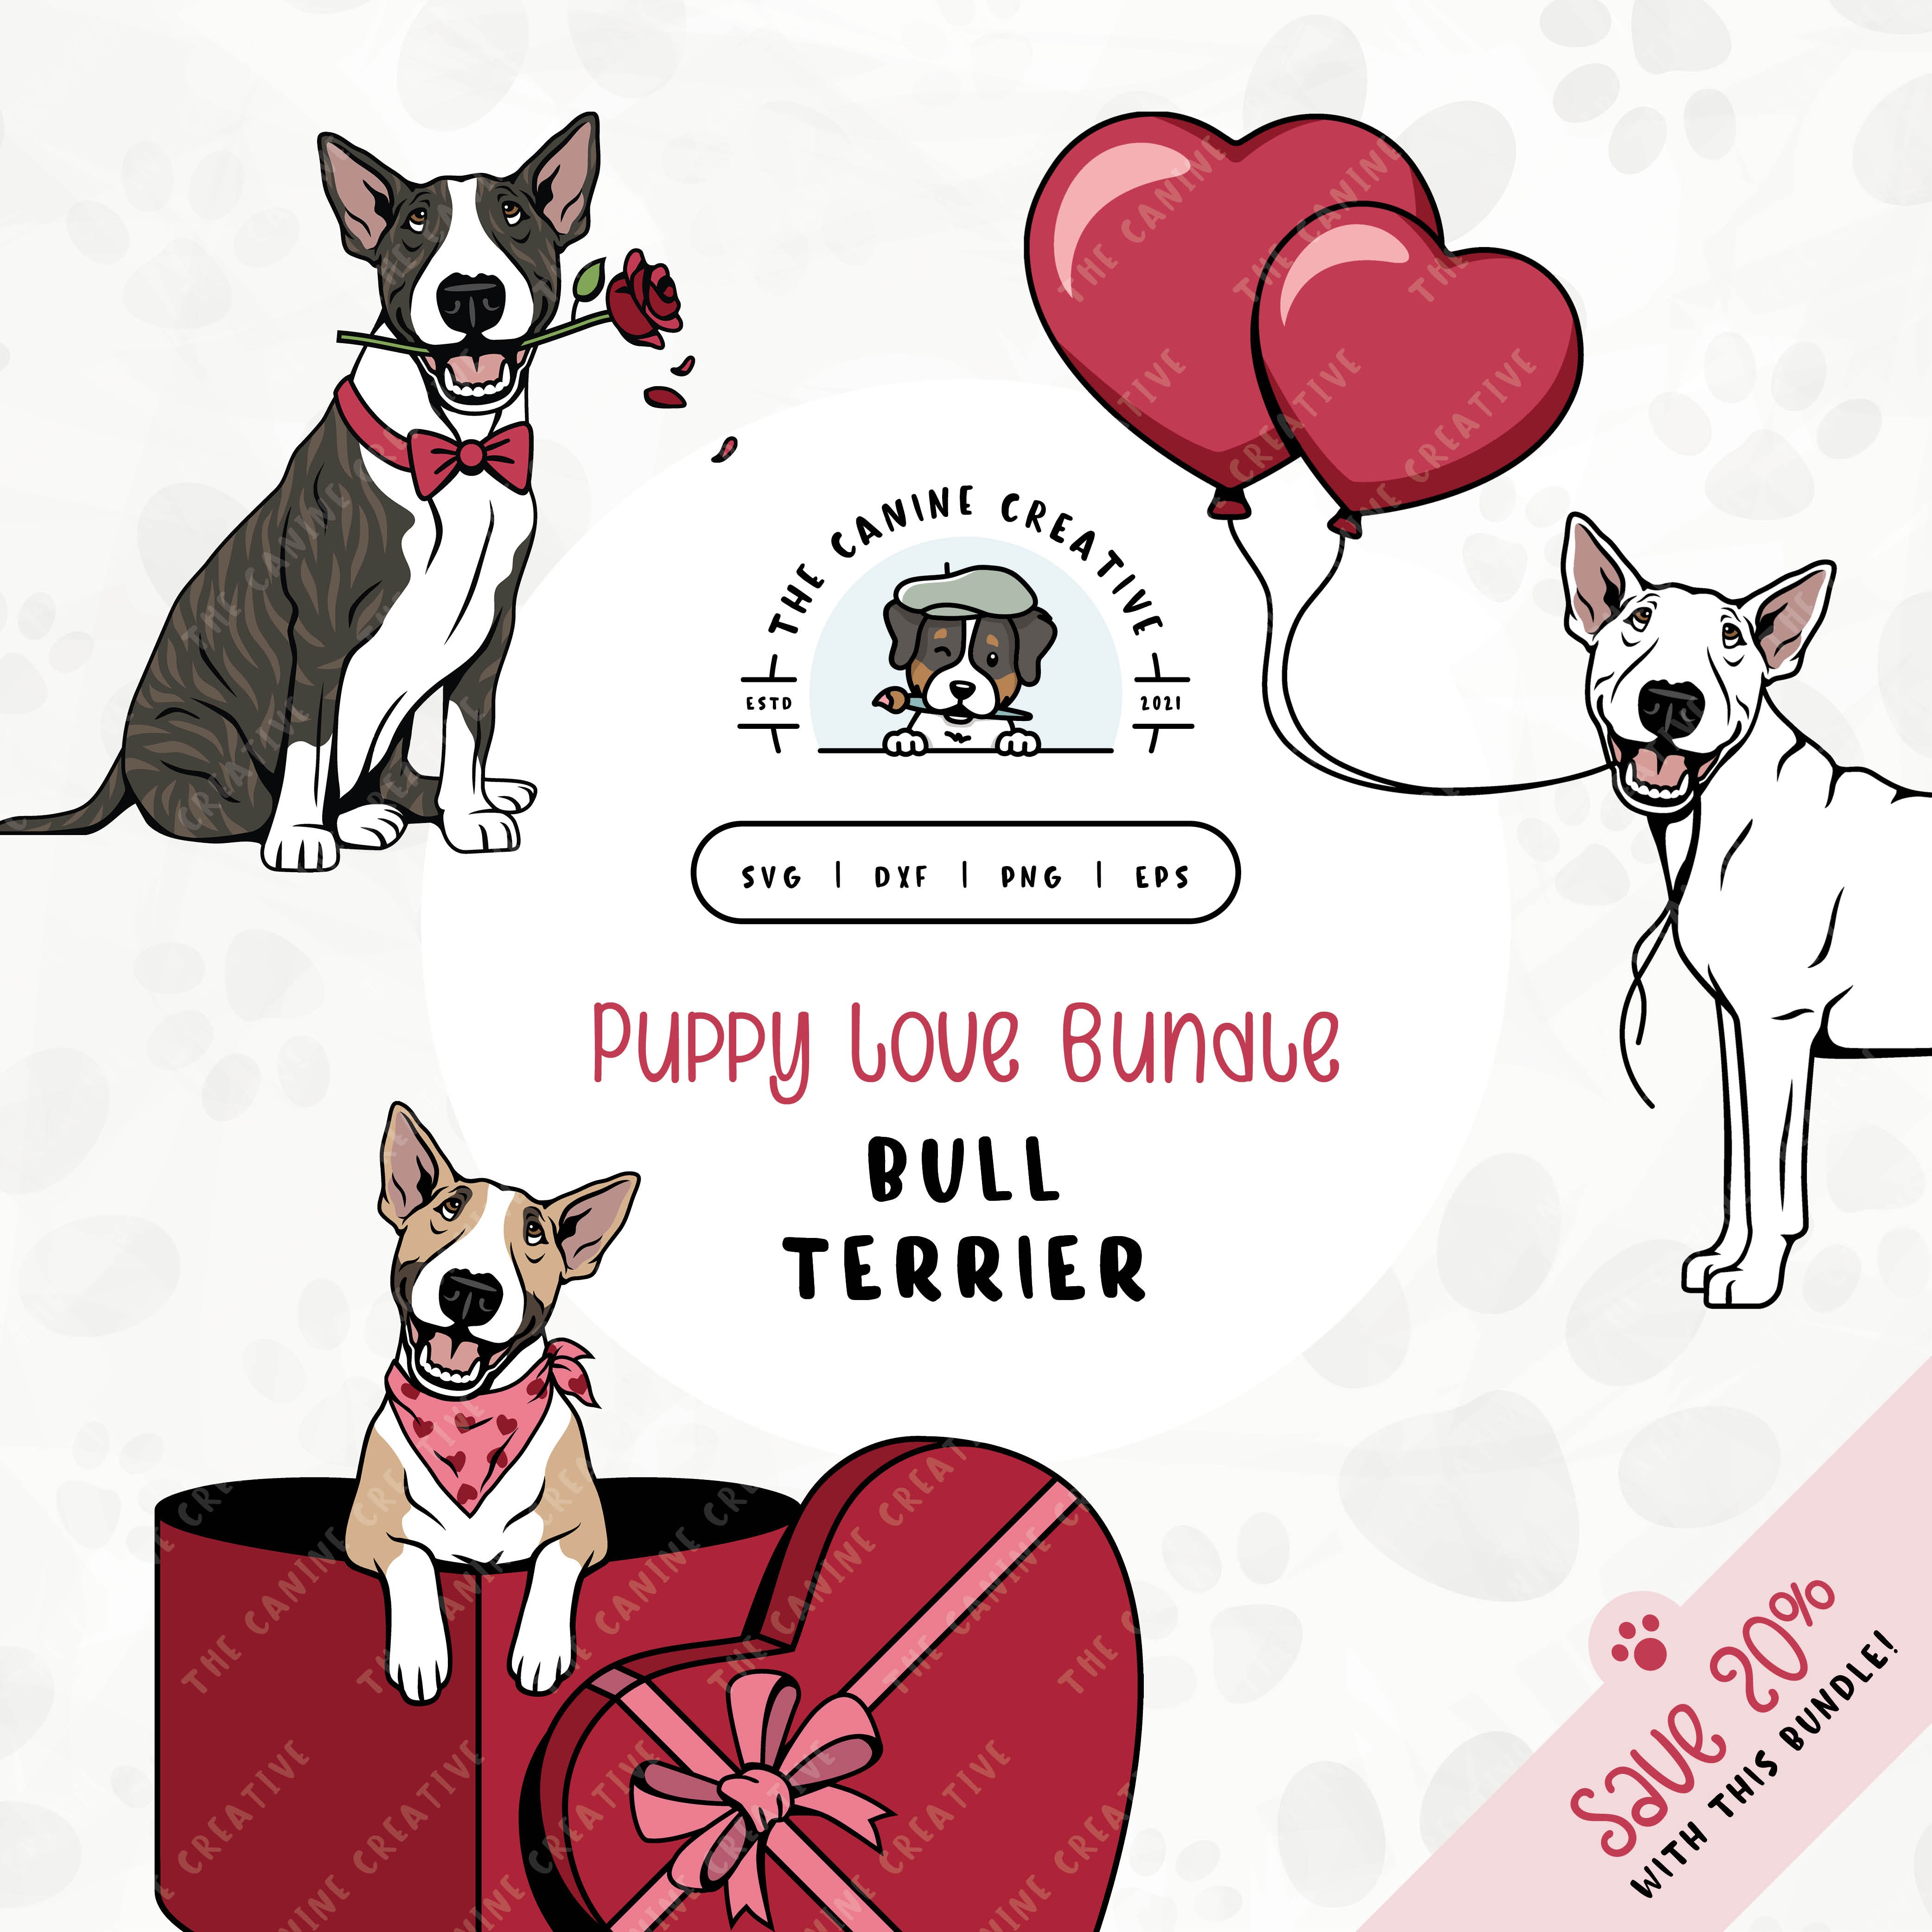 This 3-pack puppy love illustration bundle features Bull Terriers holding heart balloons, peeking out of a heart-shaped box, and holding a rose. File formats include: SVG, DXF, PNG, and EPS.